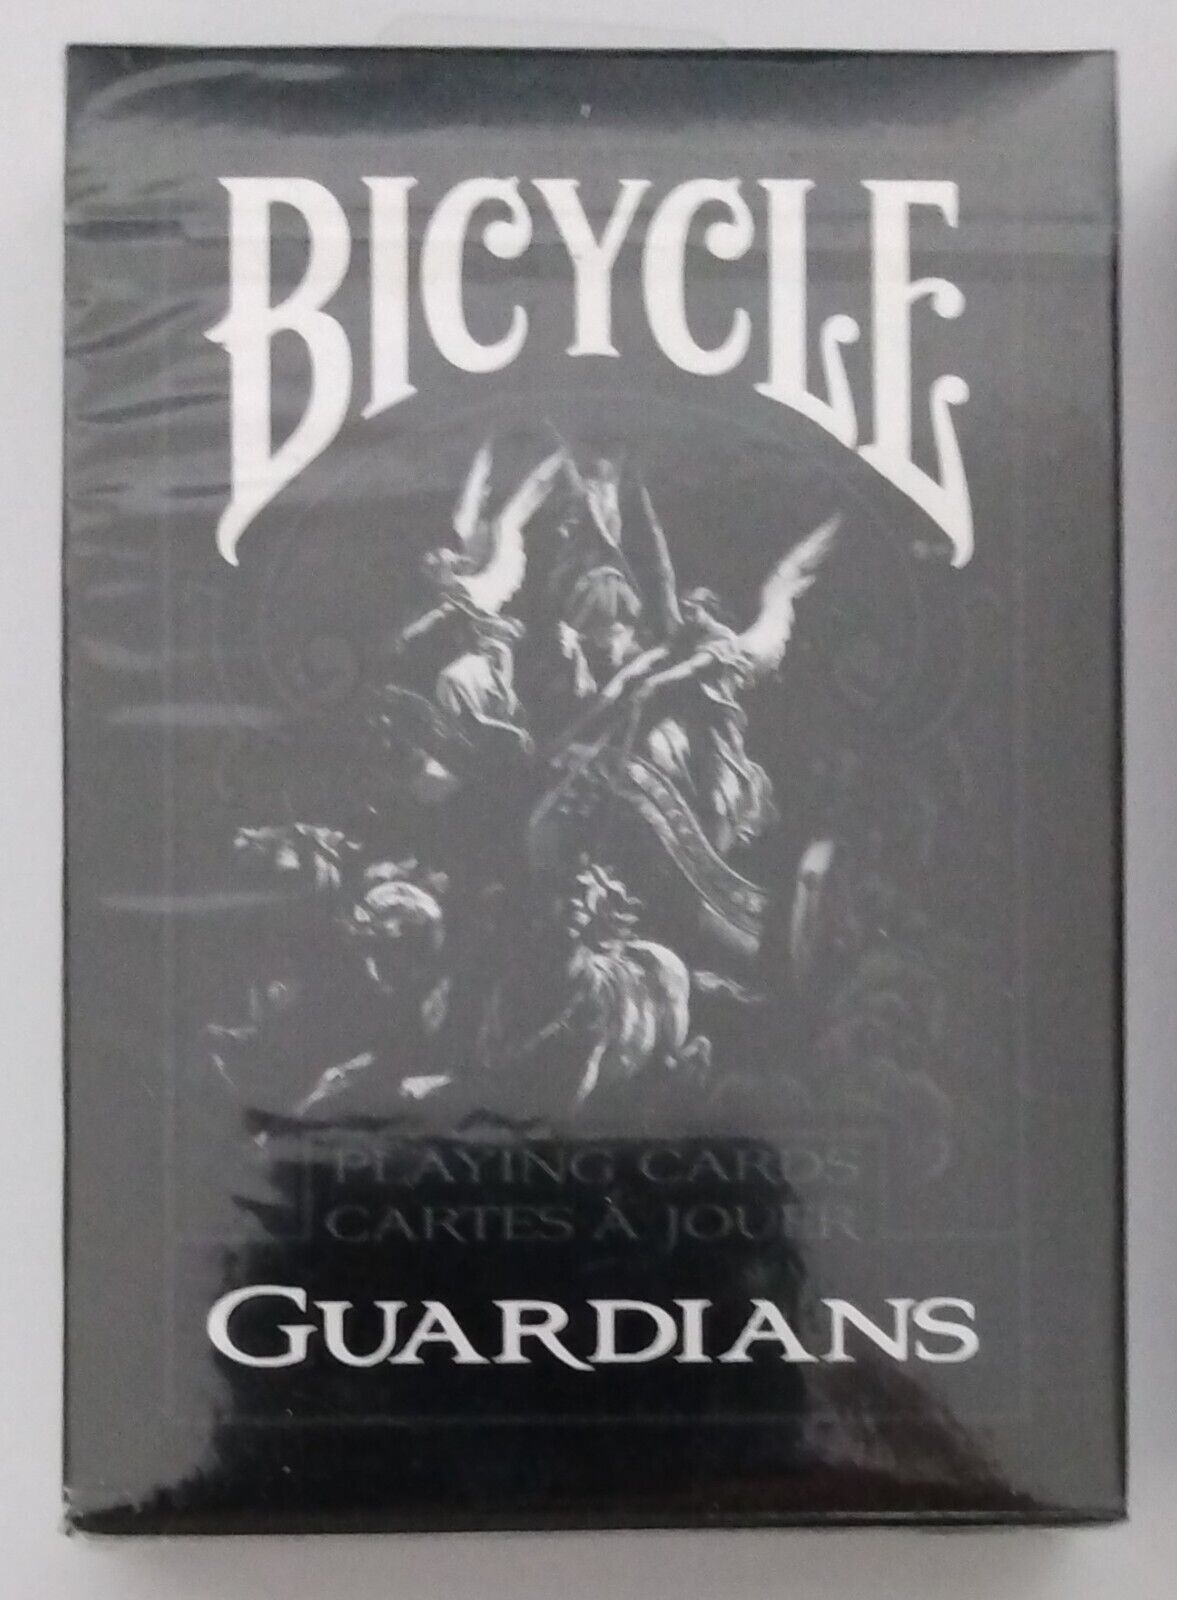 NEW Bicycle Guardians Poker Theory 11 Limited Edition Playing Cards Sealed Deck